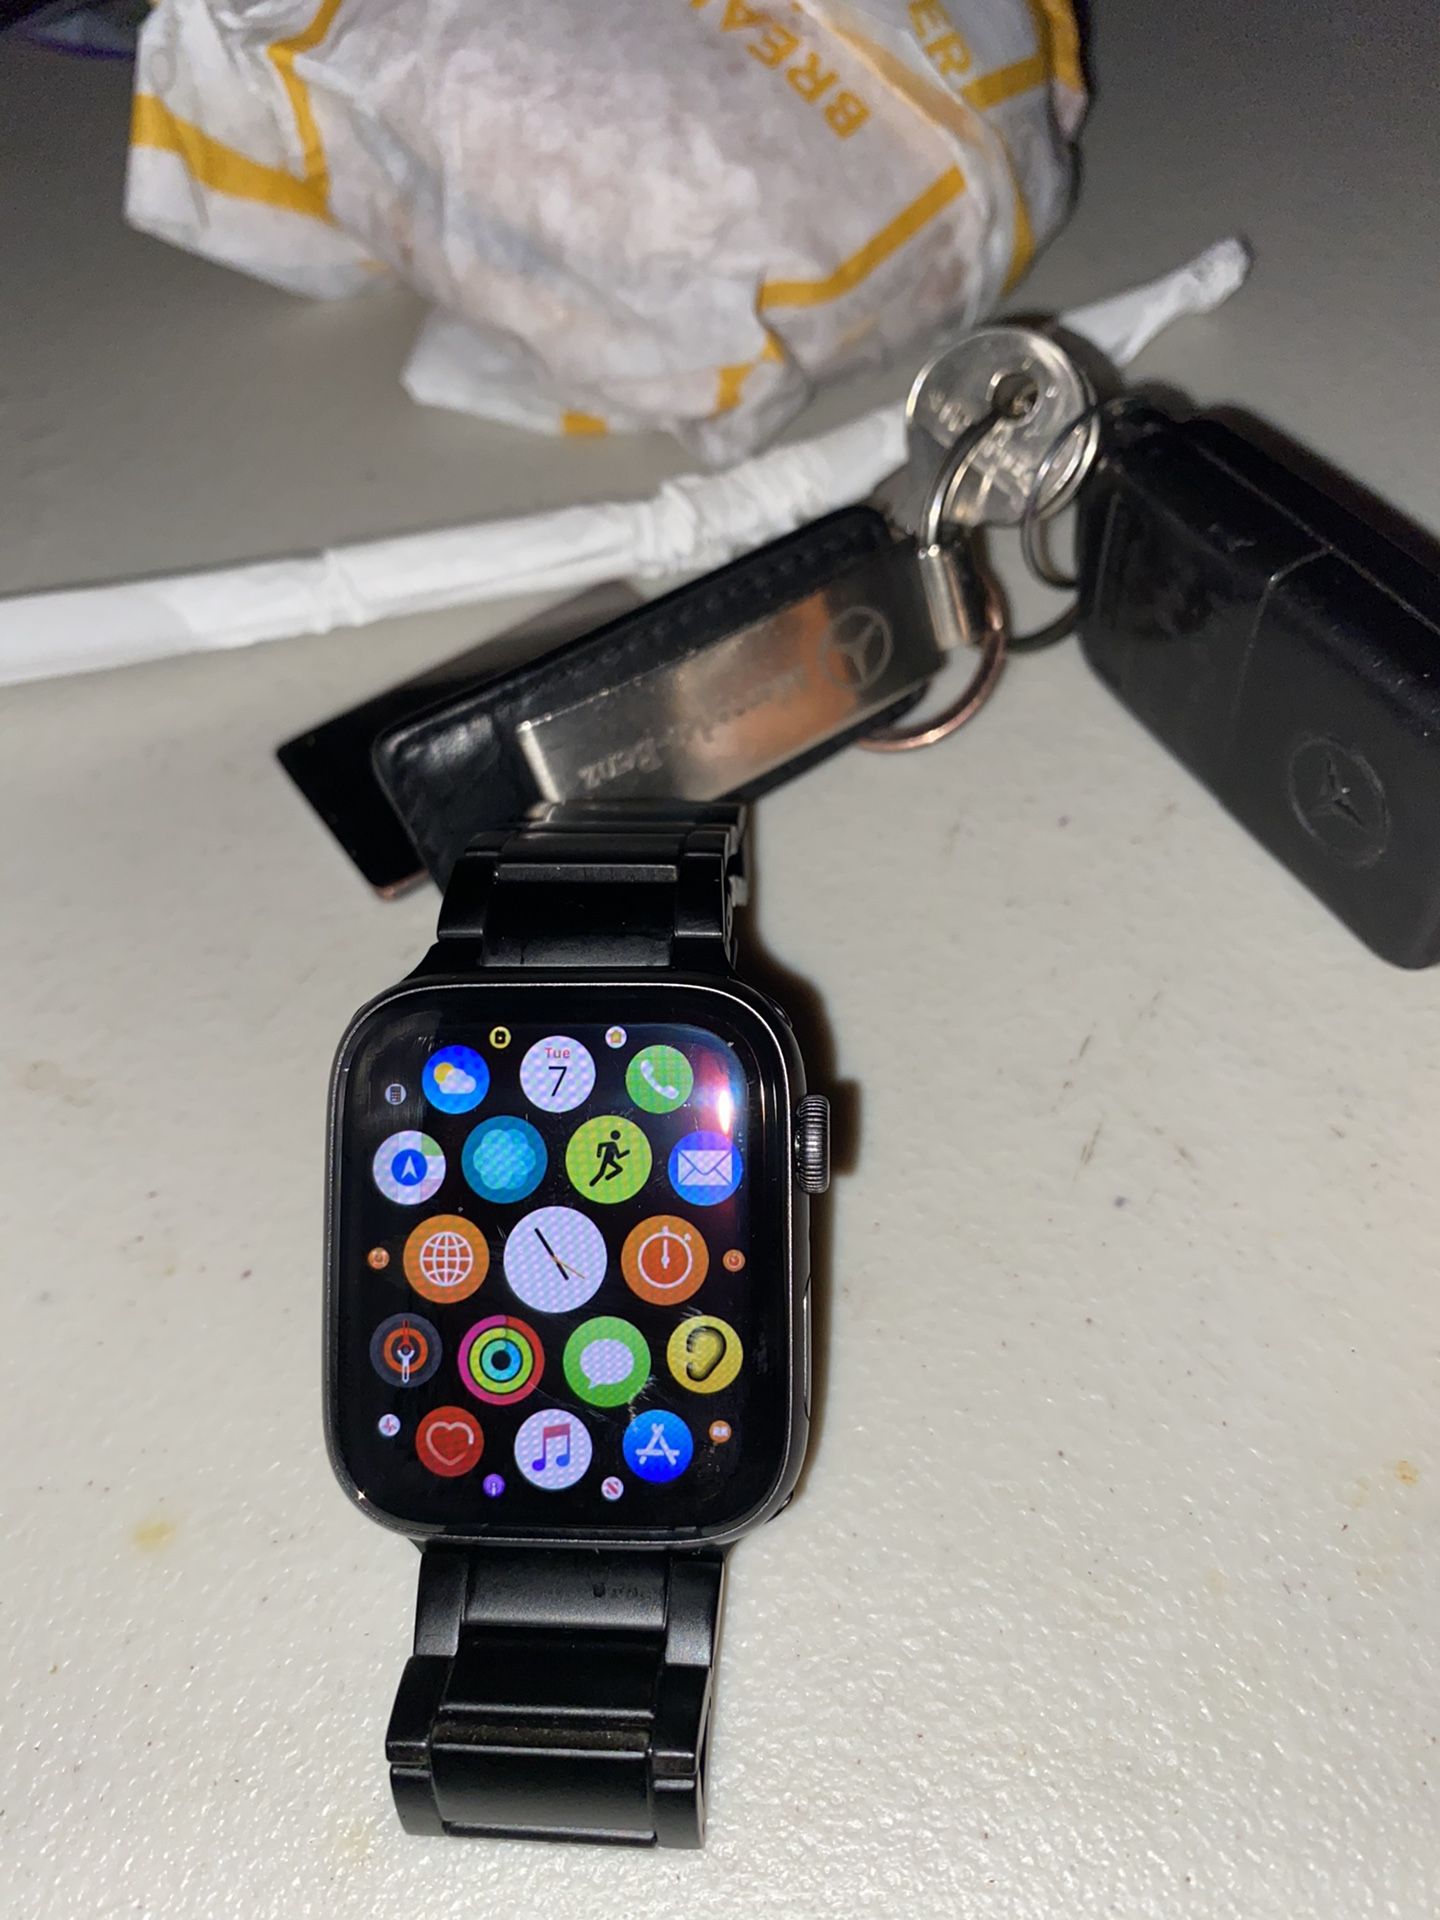 Apple Watch 5 serious with gps and cellular